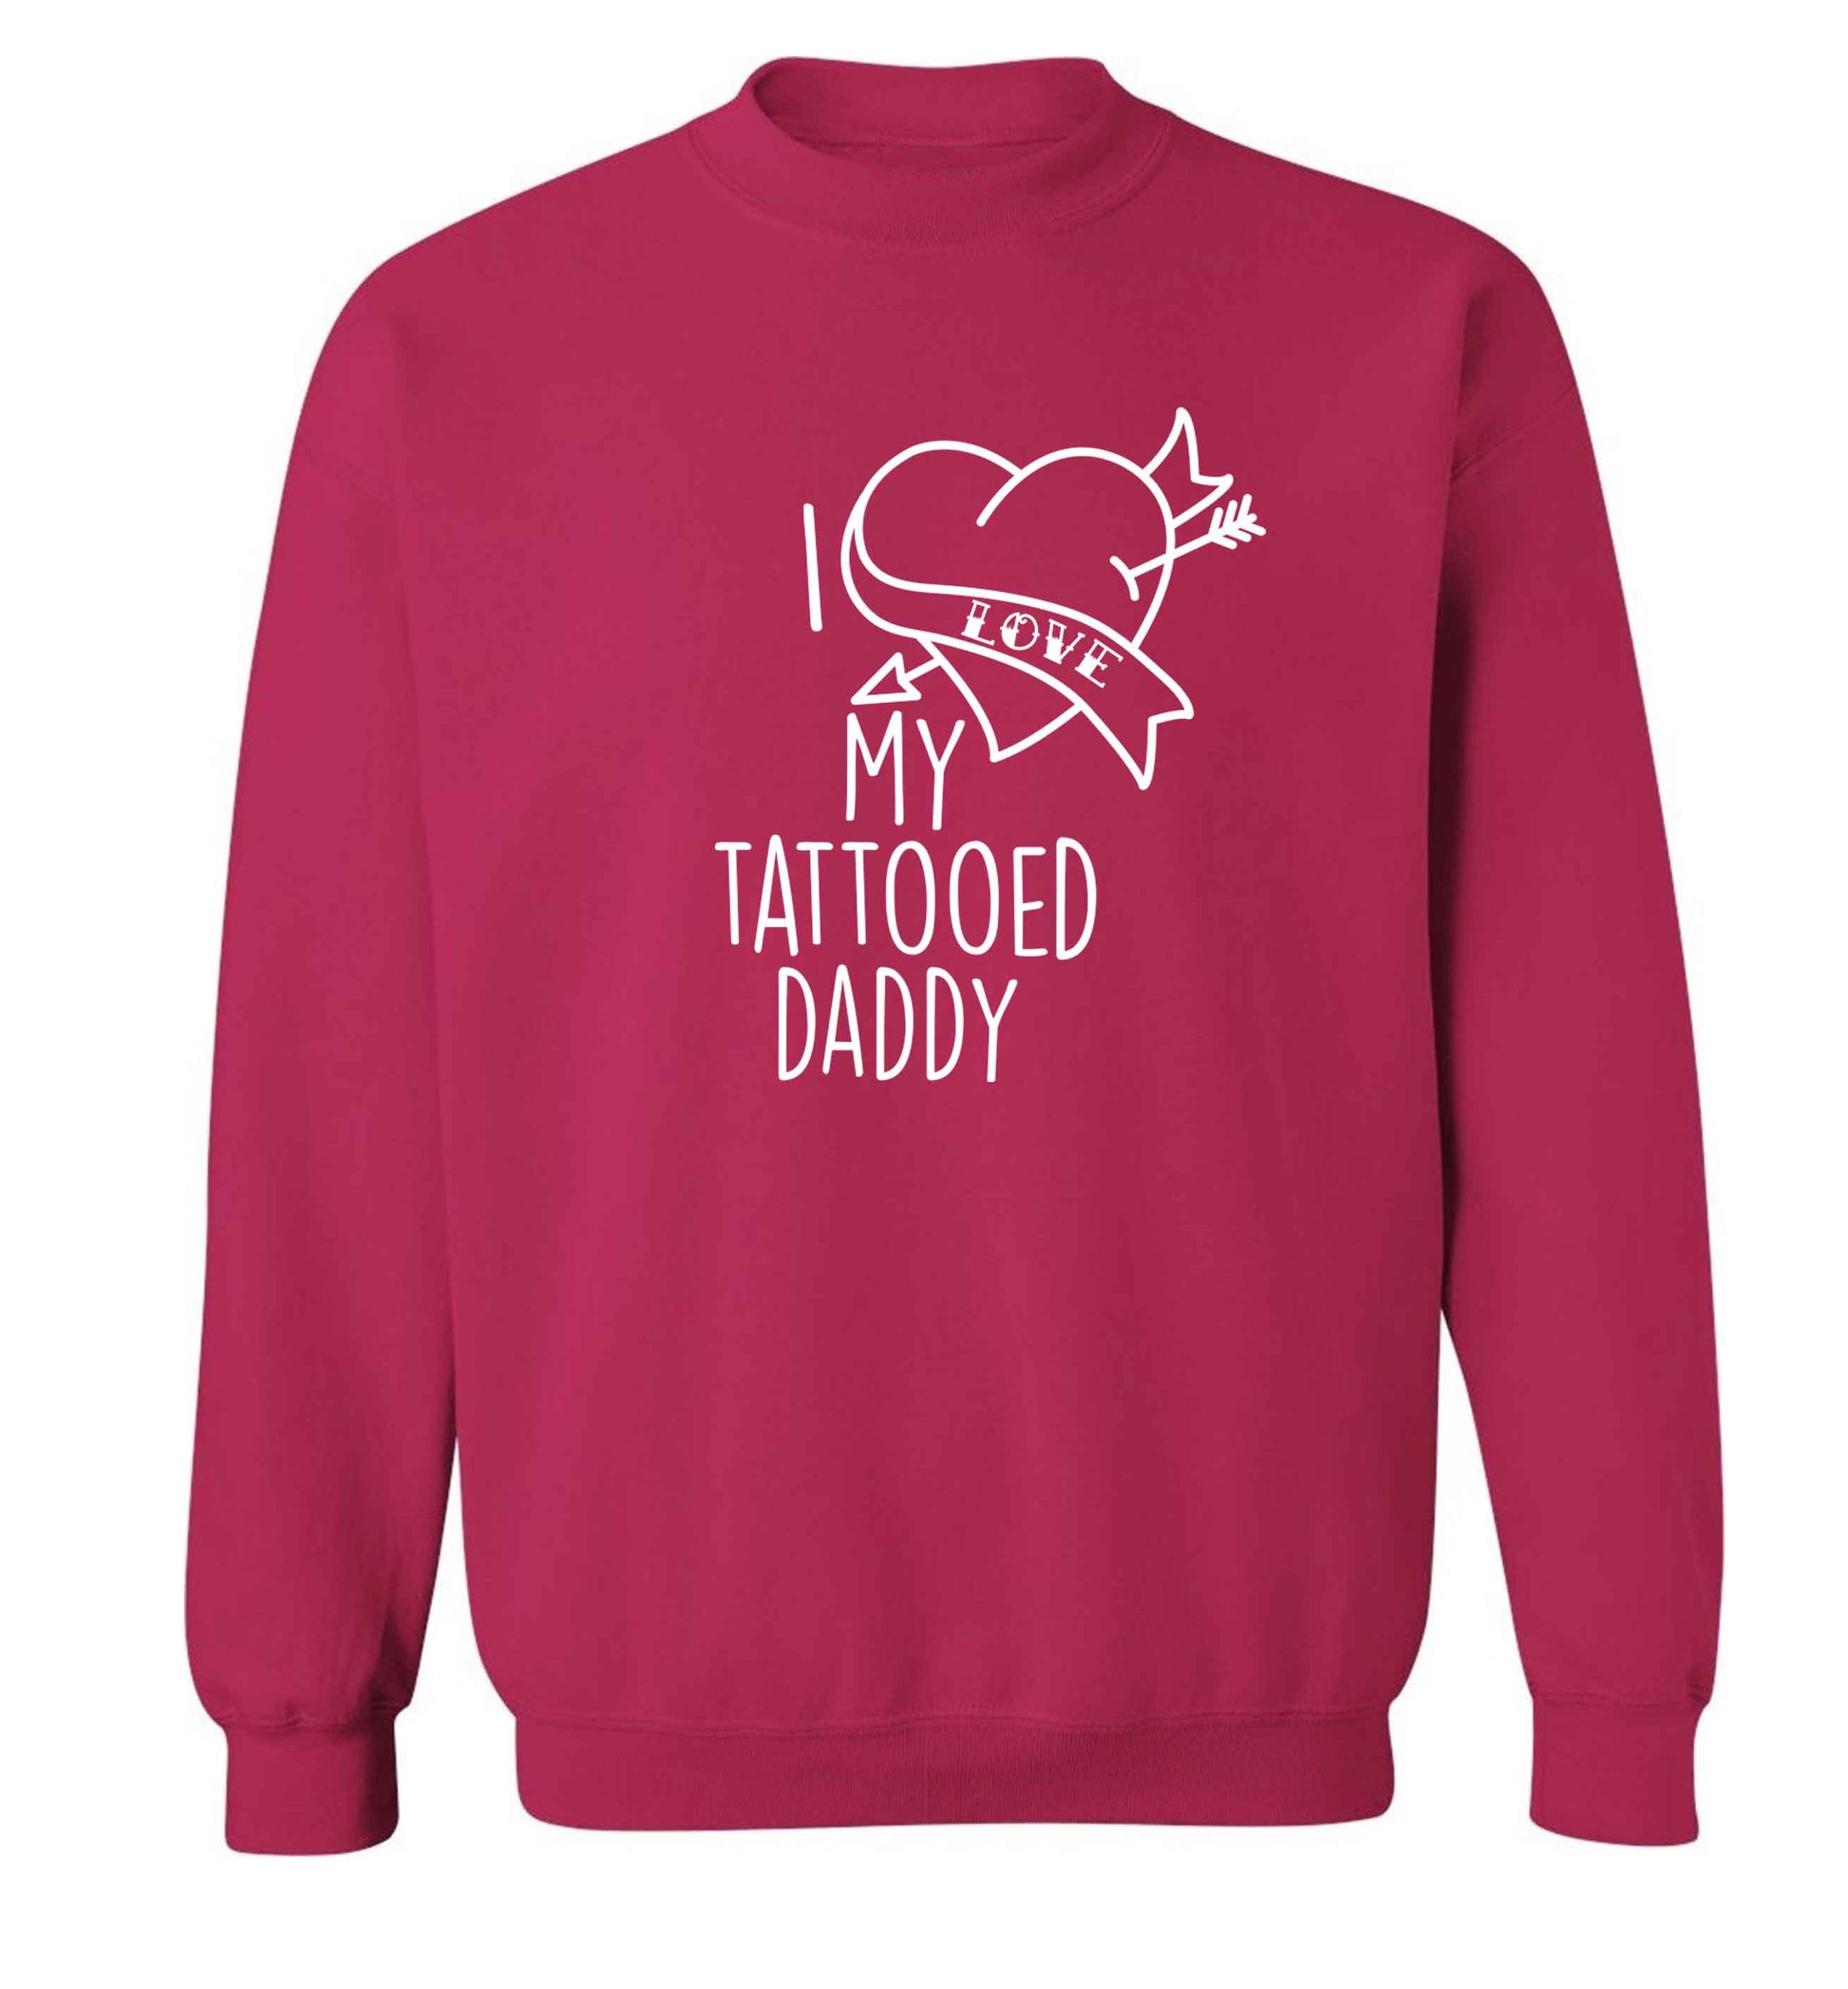 I love my tattooed daddy adult's unisex pink sweater 2XL